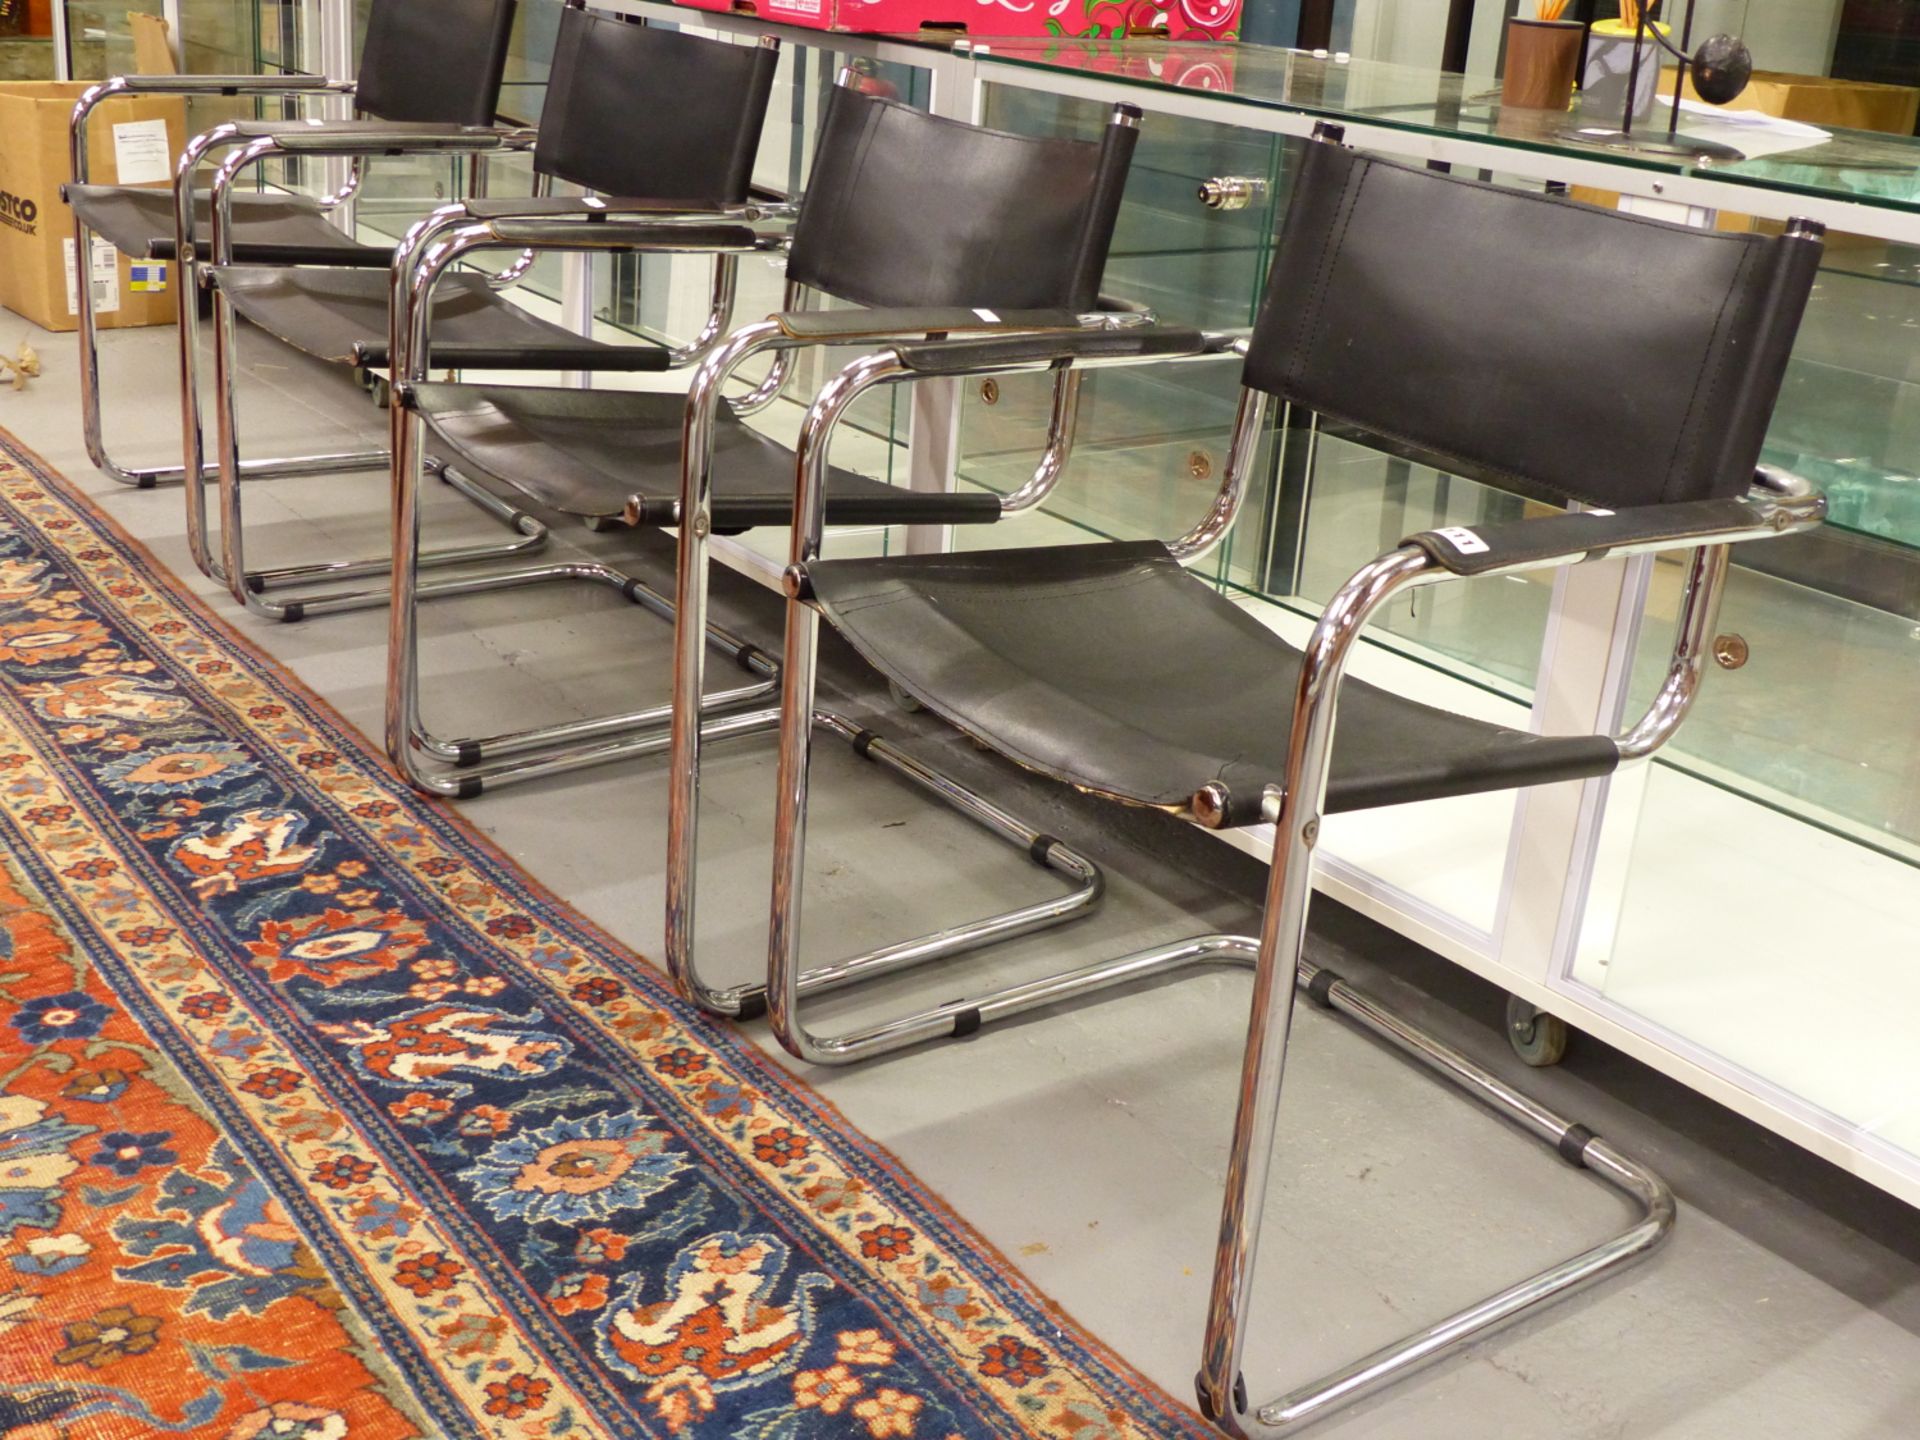 A SET OF FOUR CHROME AND LEATHER RETRO ARMCHAIRS AFTER A DESIGN BY MARCEL BREUER.